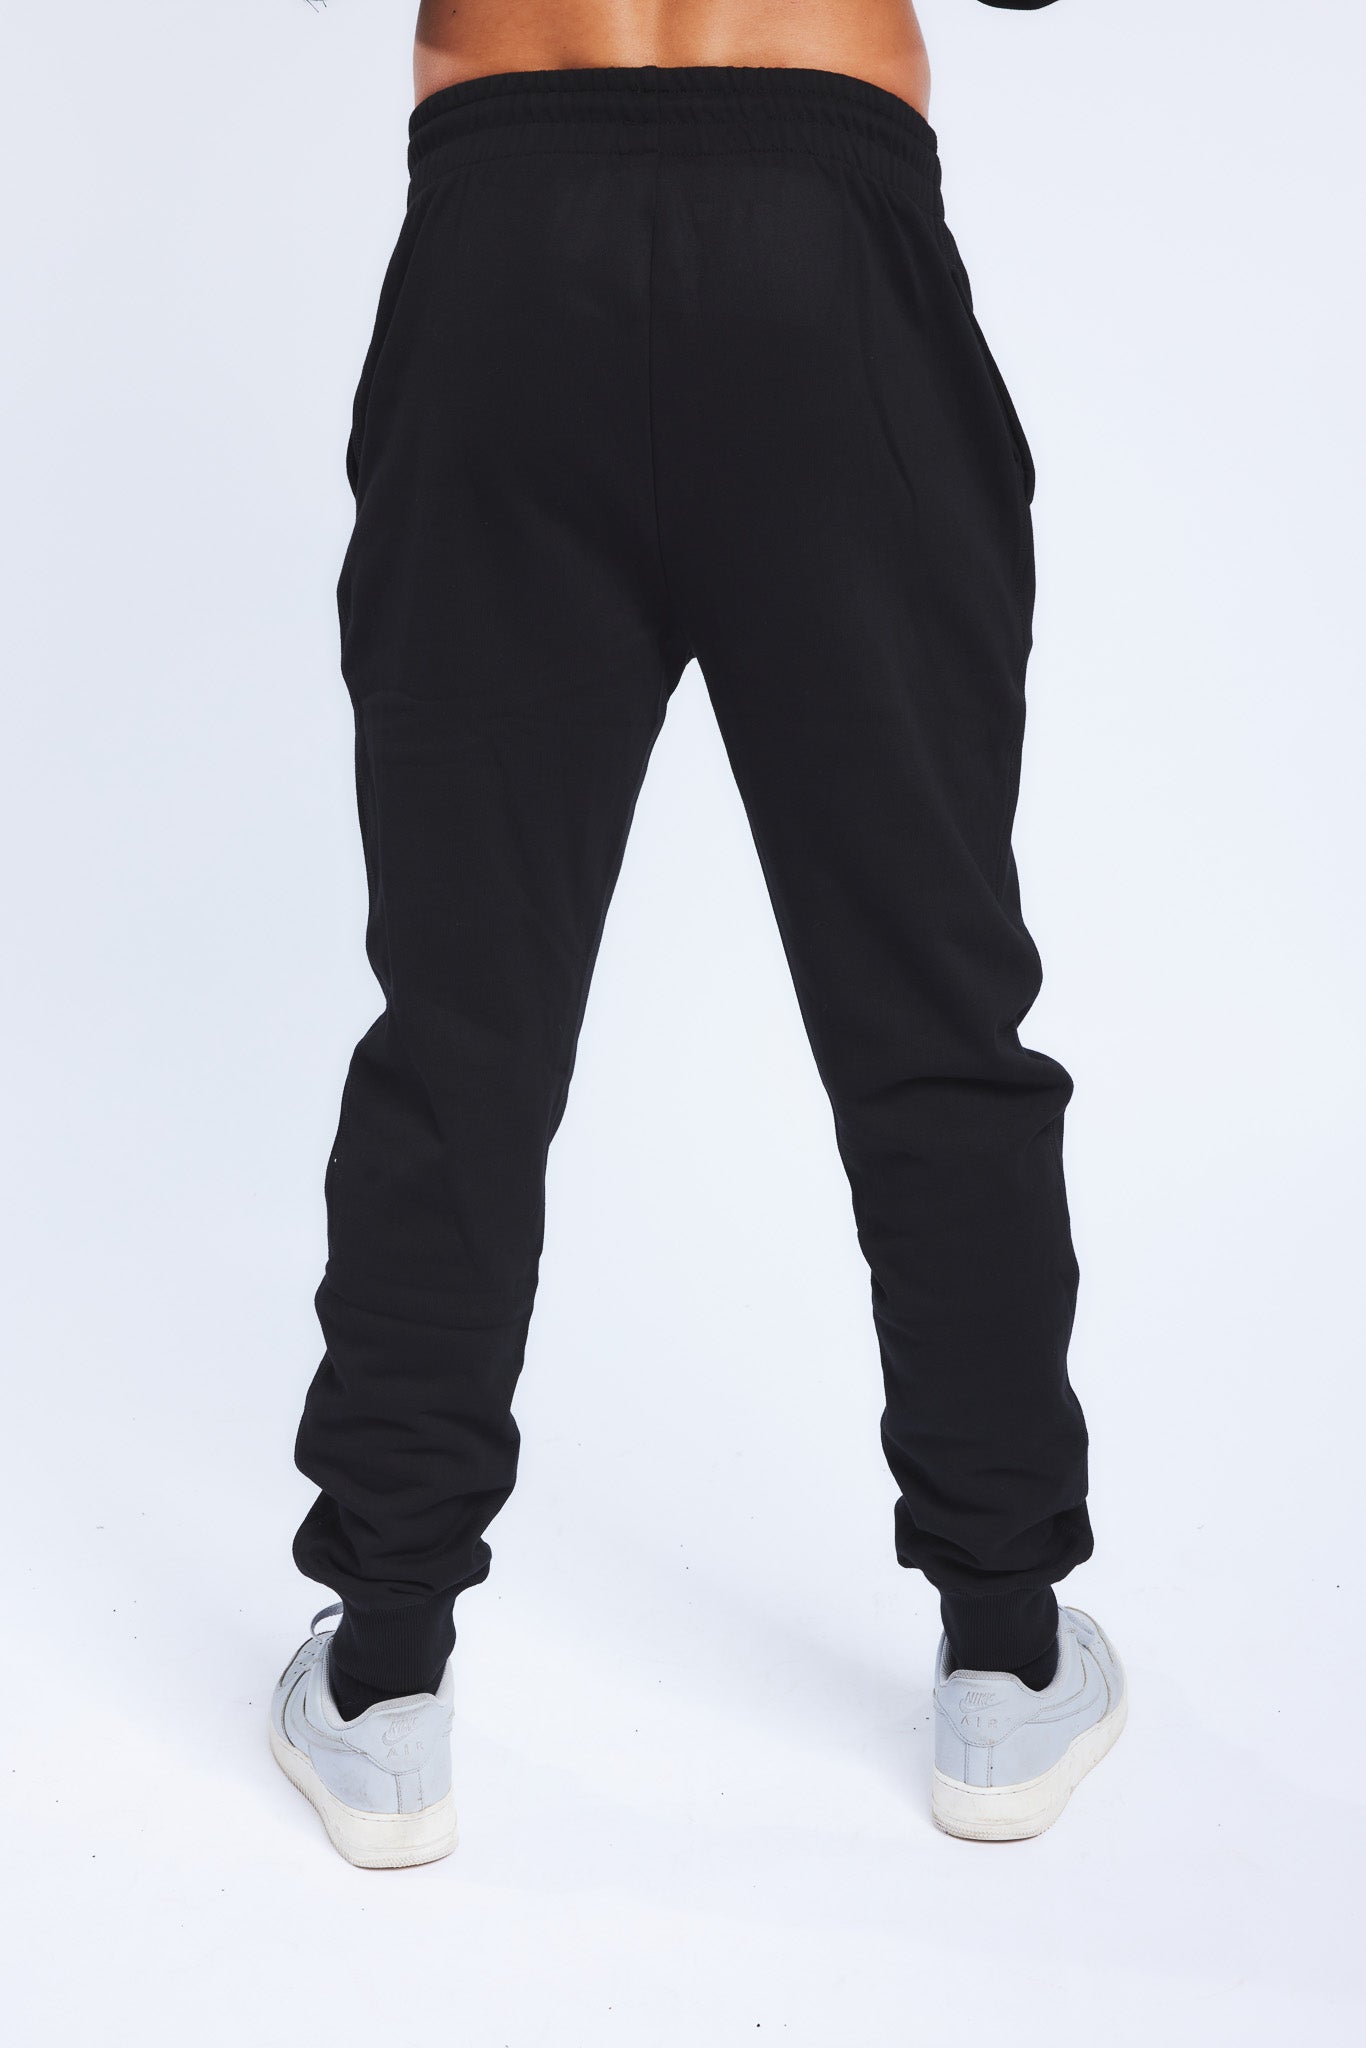 Men's Mind Trackpant - The Good Human Factory